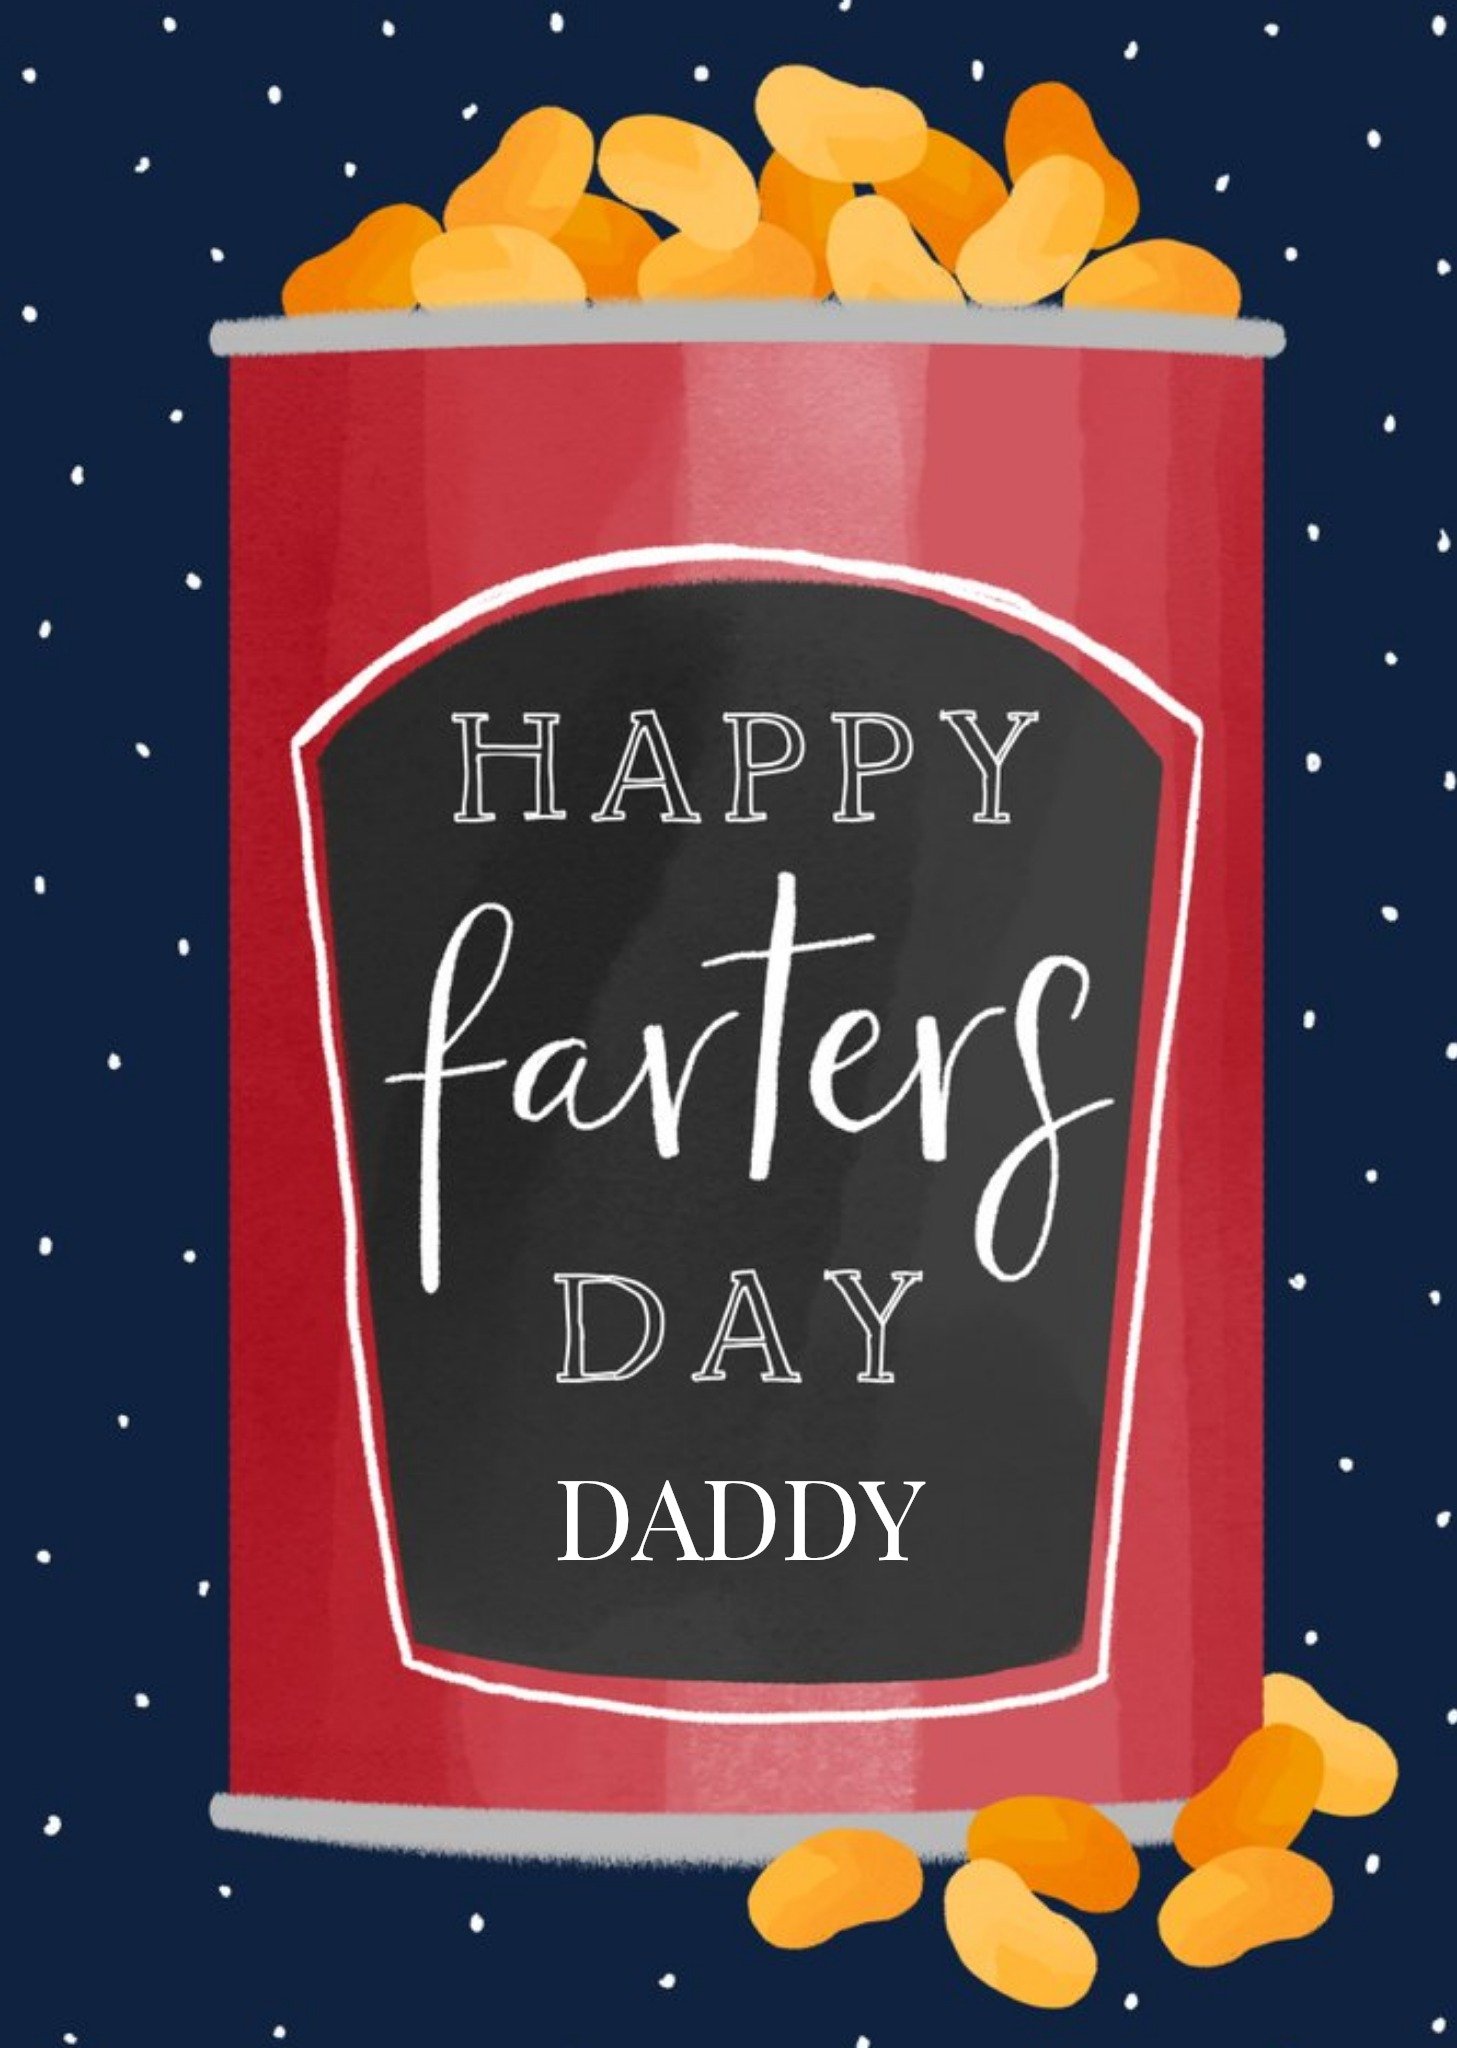 Okey Dokey Design Daddy Happy Farters Day Baked Beans Father's Day Card, Large